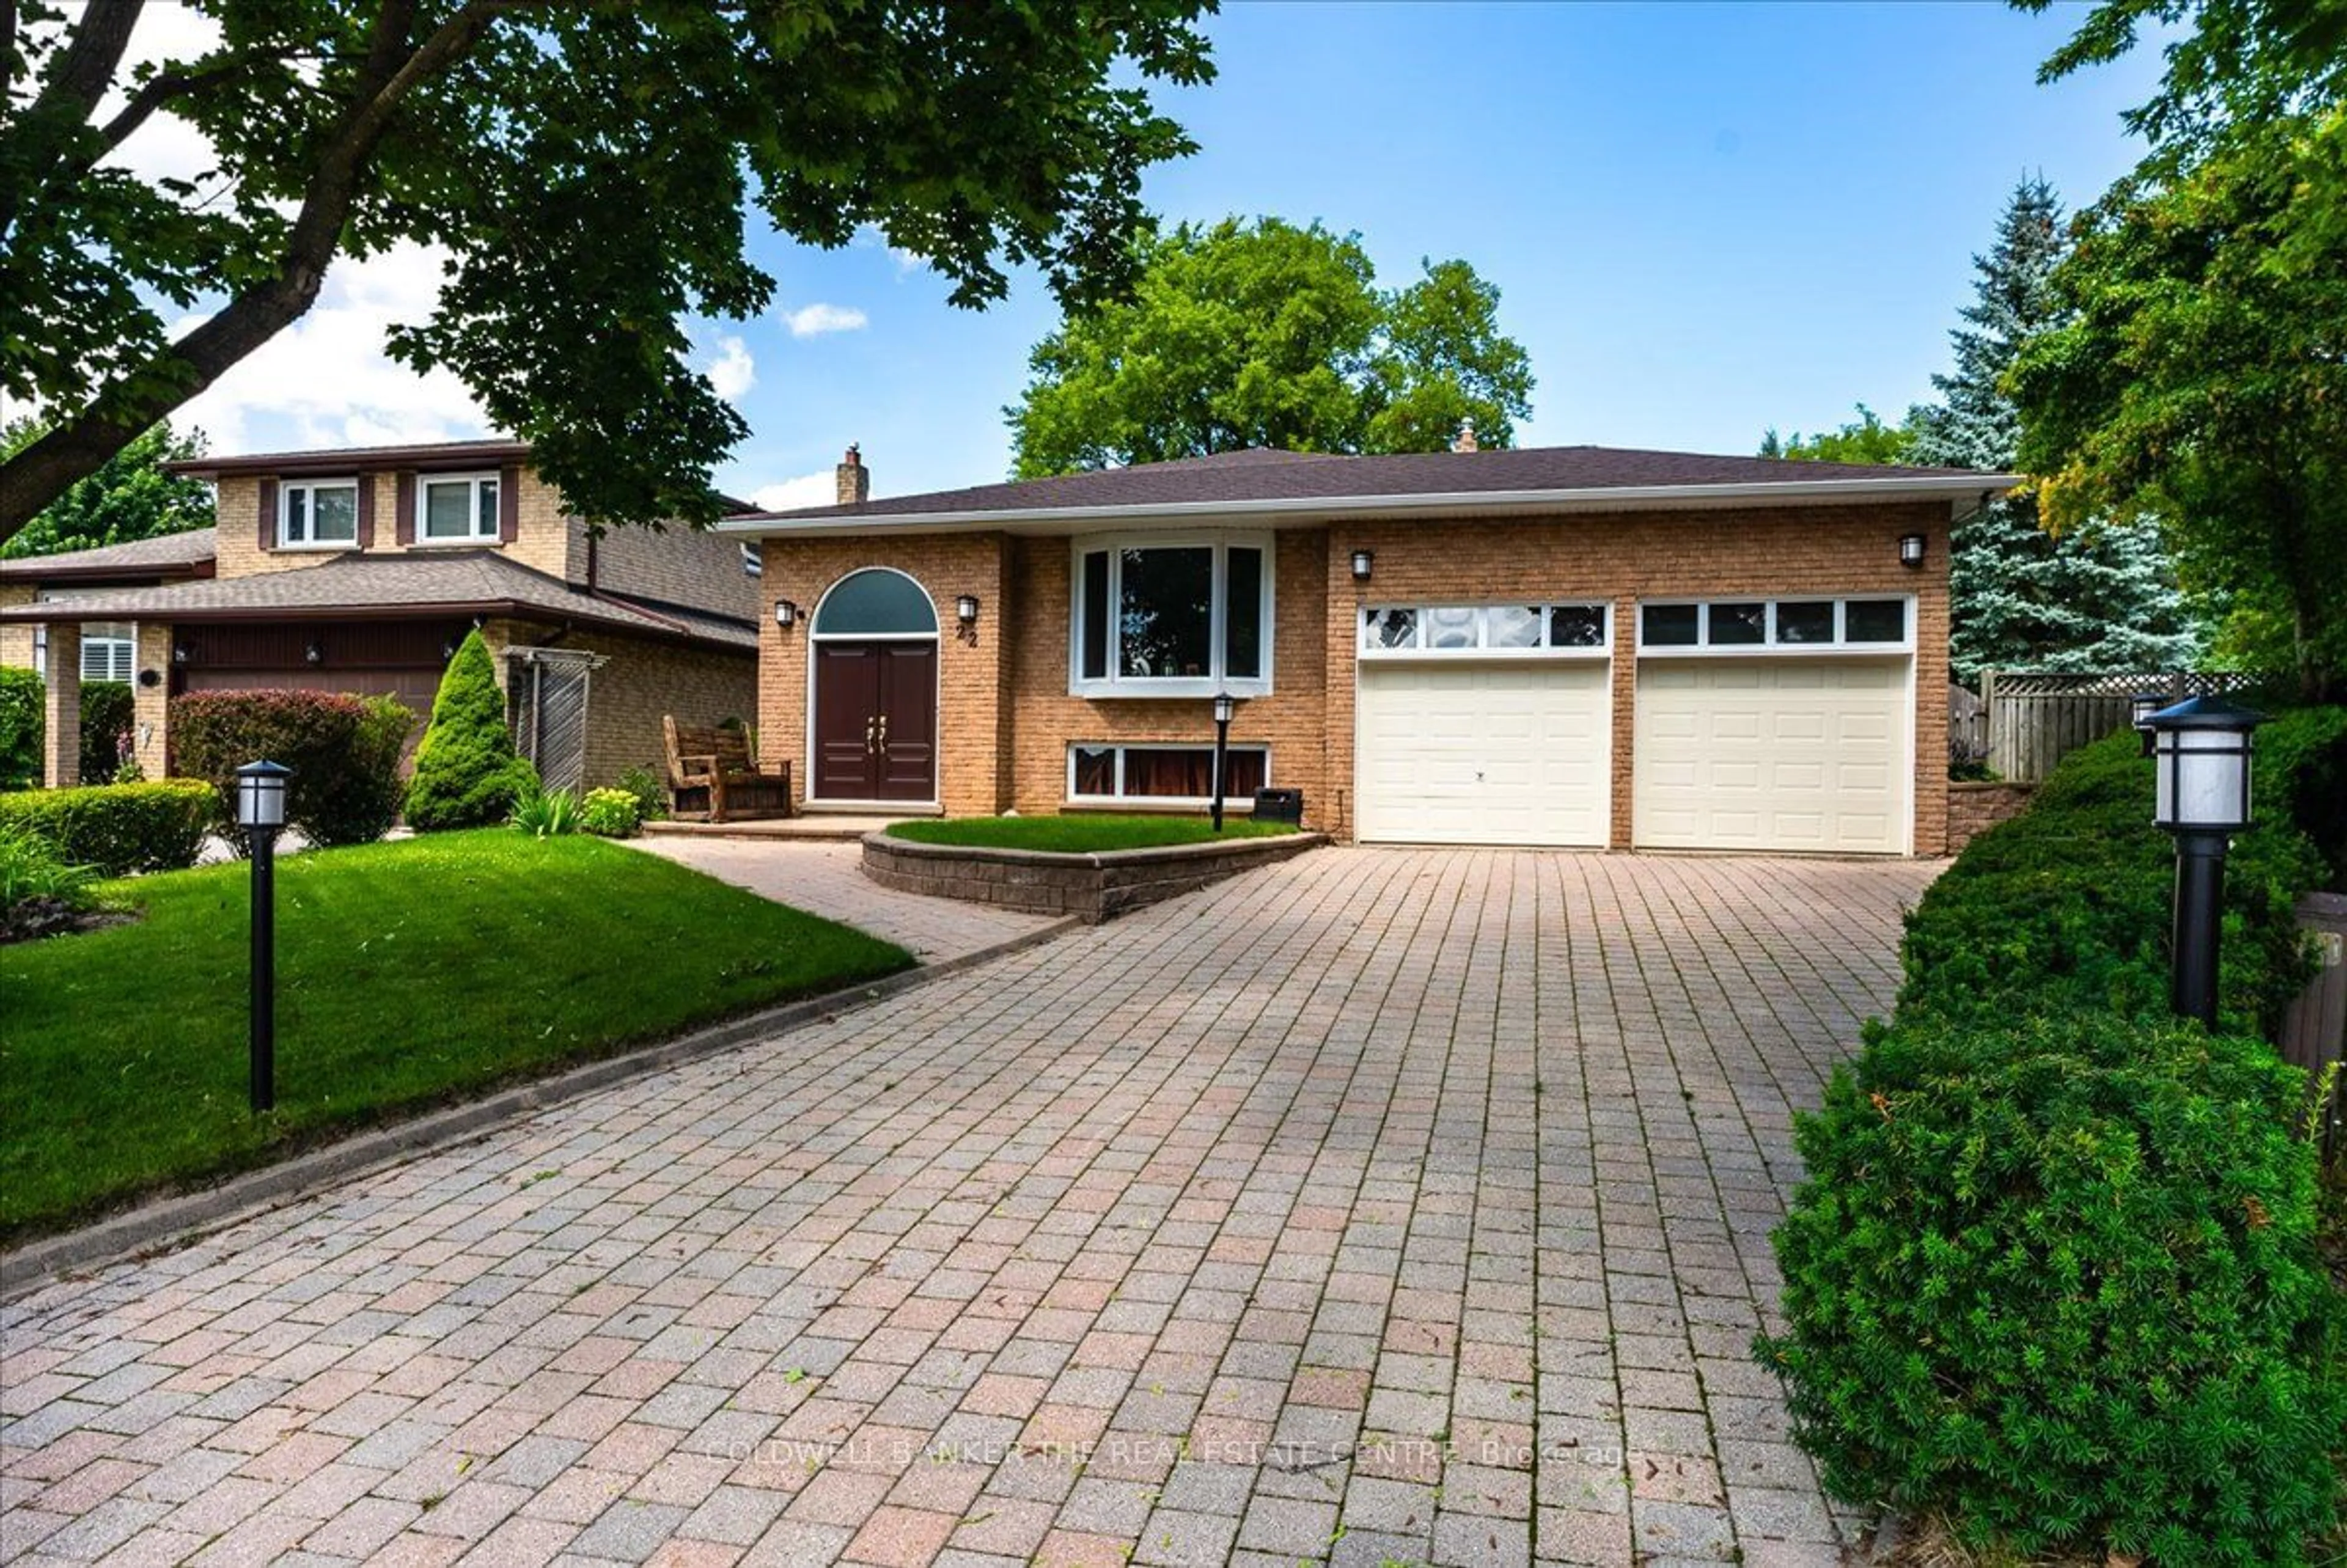 Home with brick exterior material for 22 Earls Crt, East Gwillimbury Ontario L9N 1E5